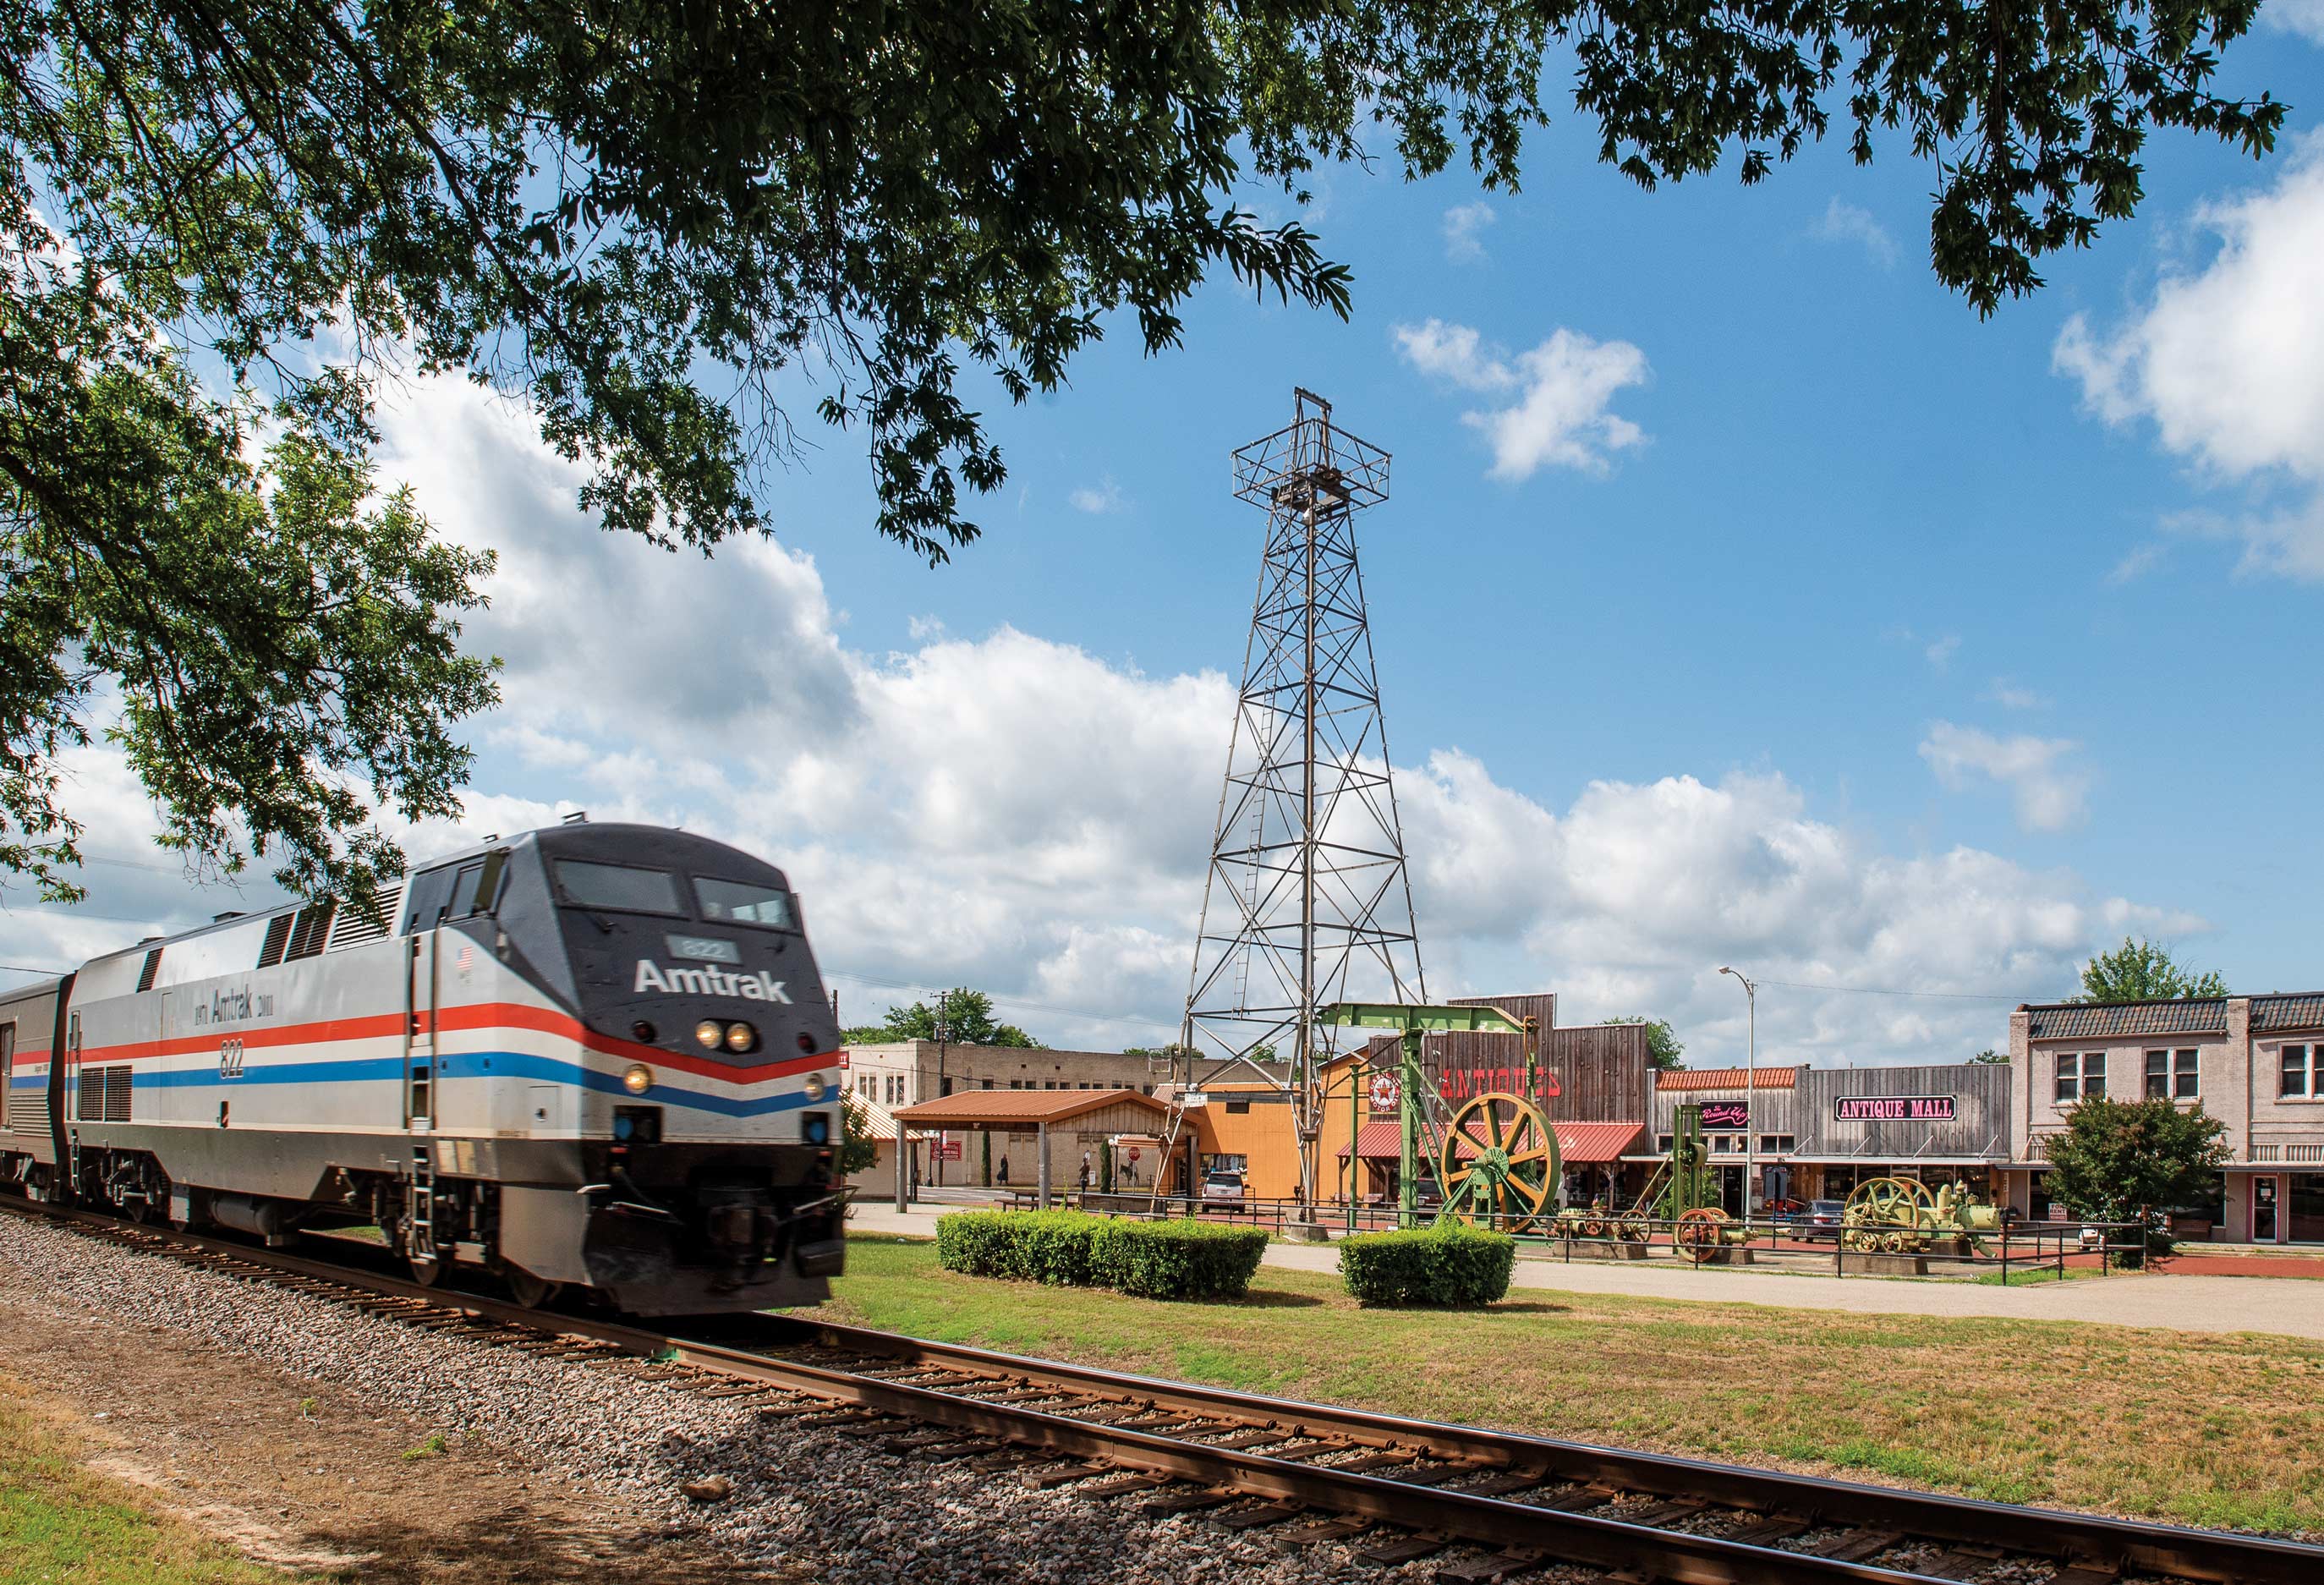 A train on the tracks in Gladewater